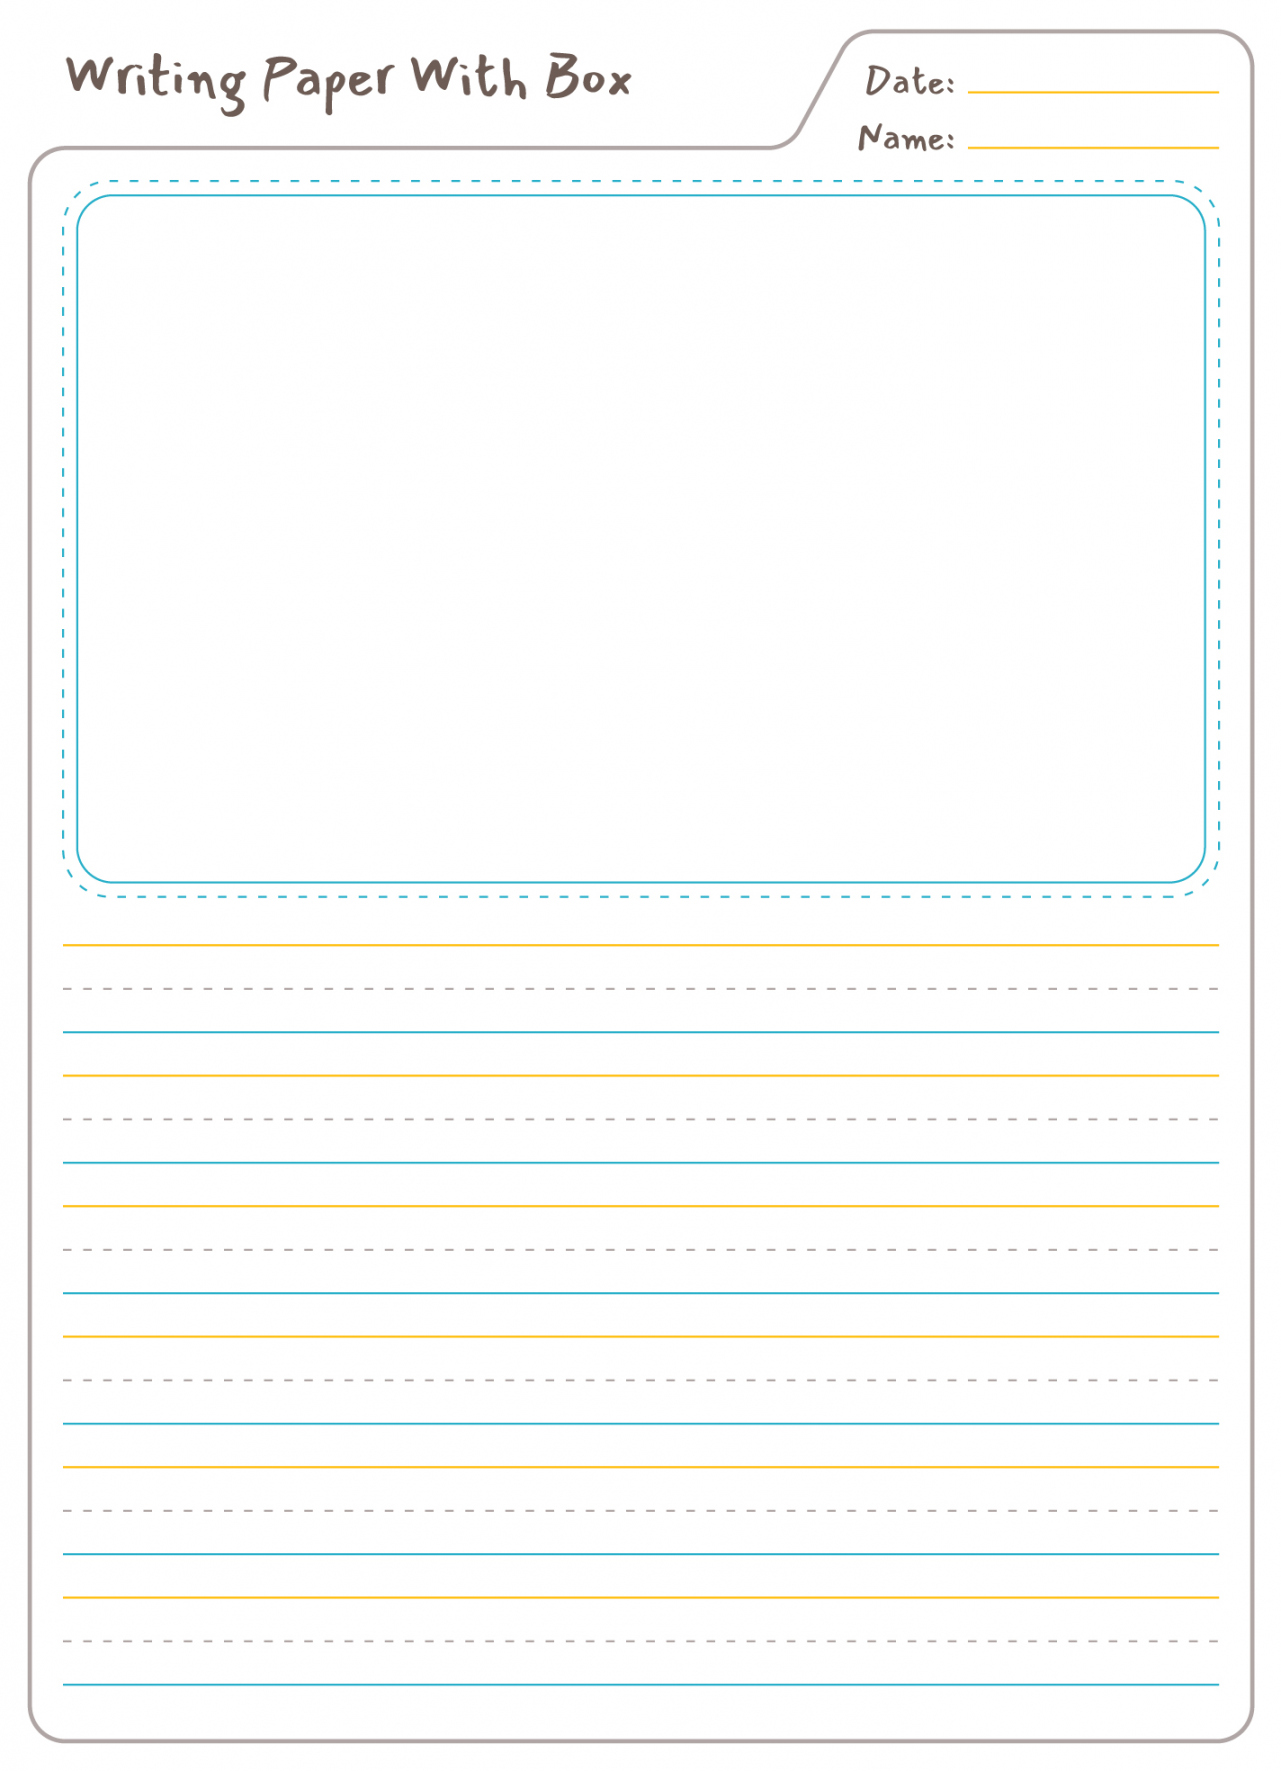 Lined Paper With Picture Box Free Google Docs Template - gdoc - Writing Paper With Picture Box